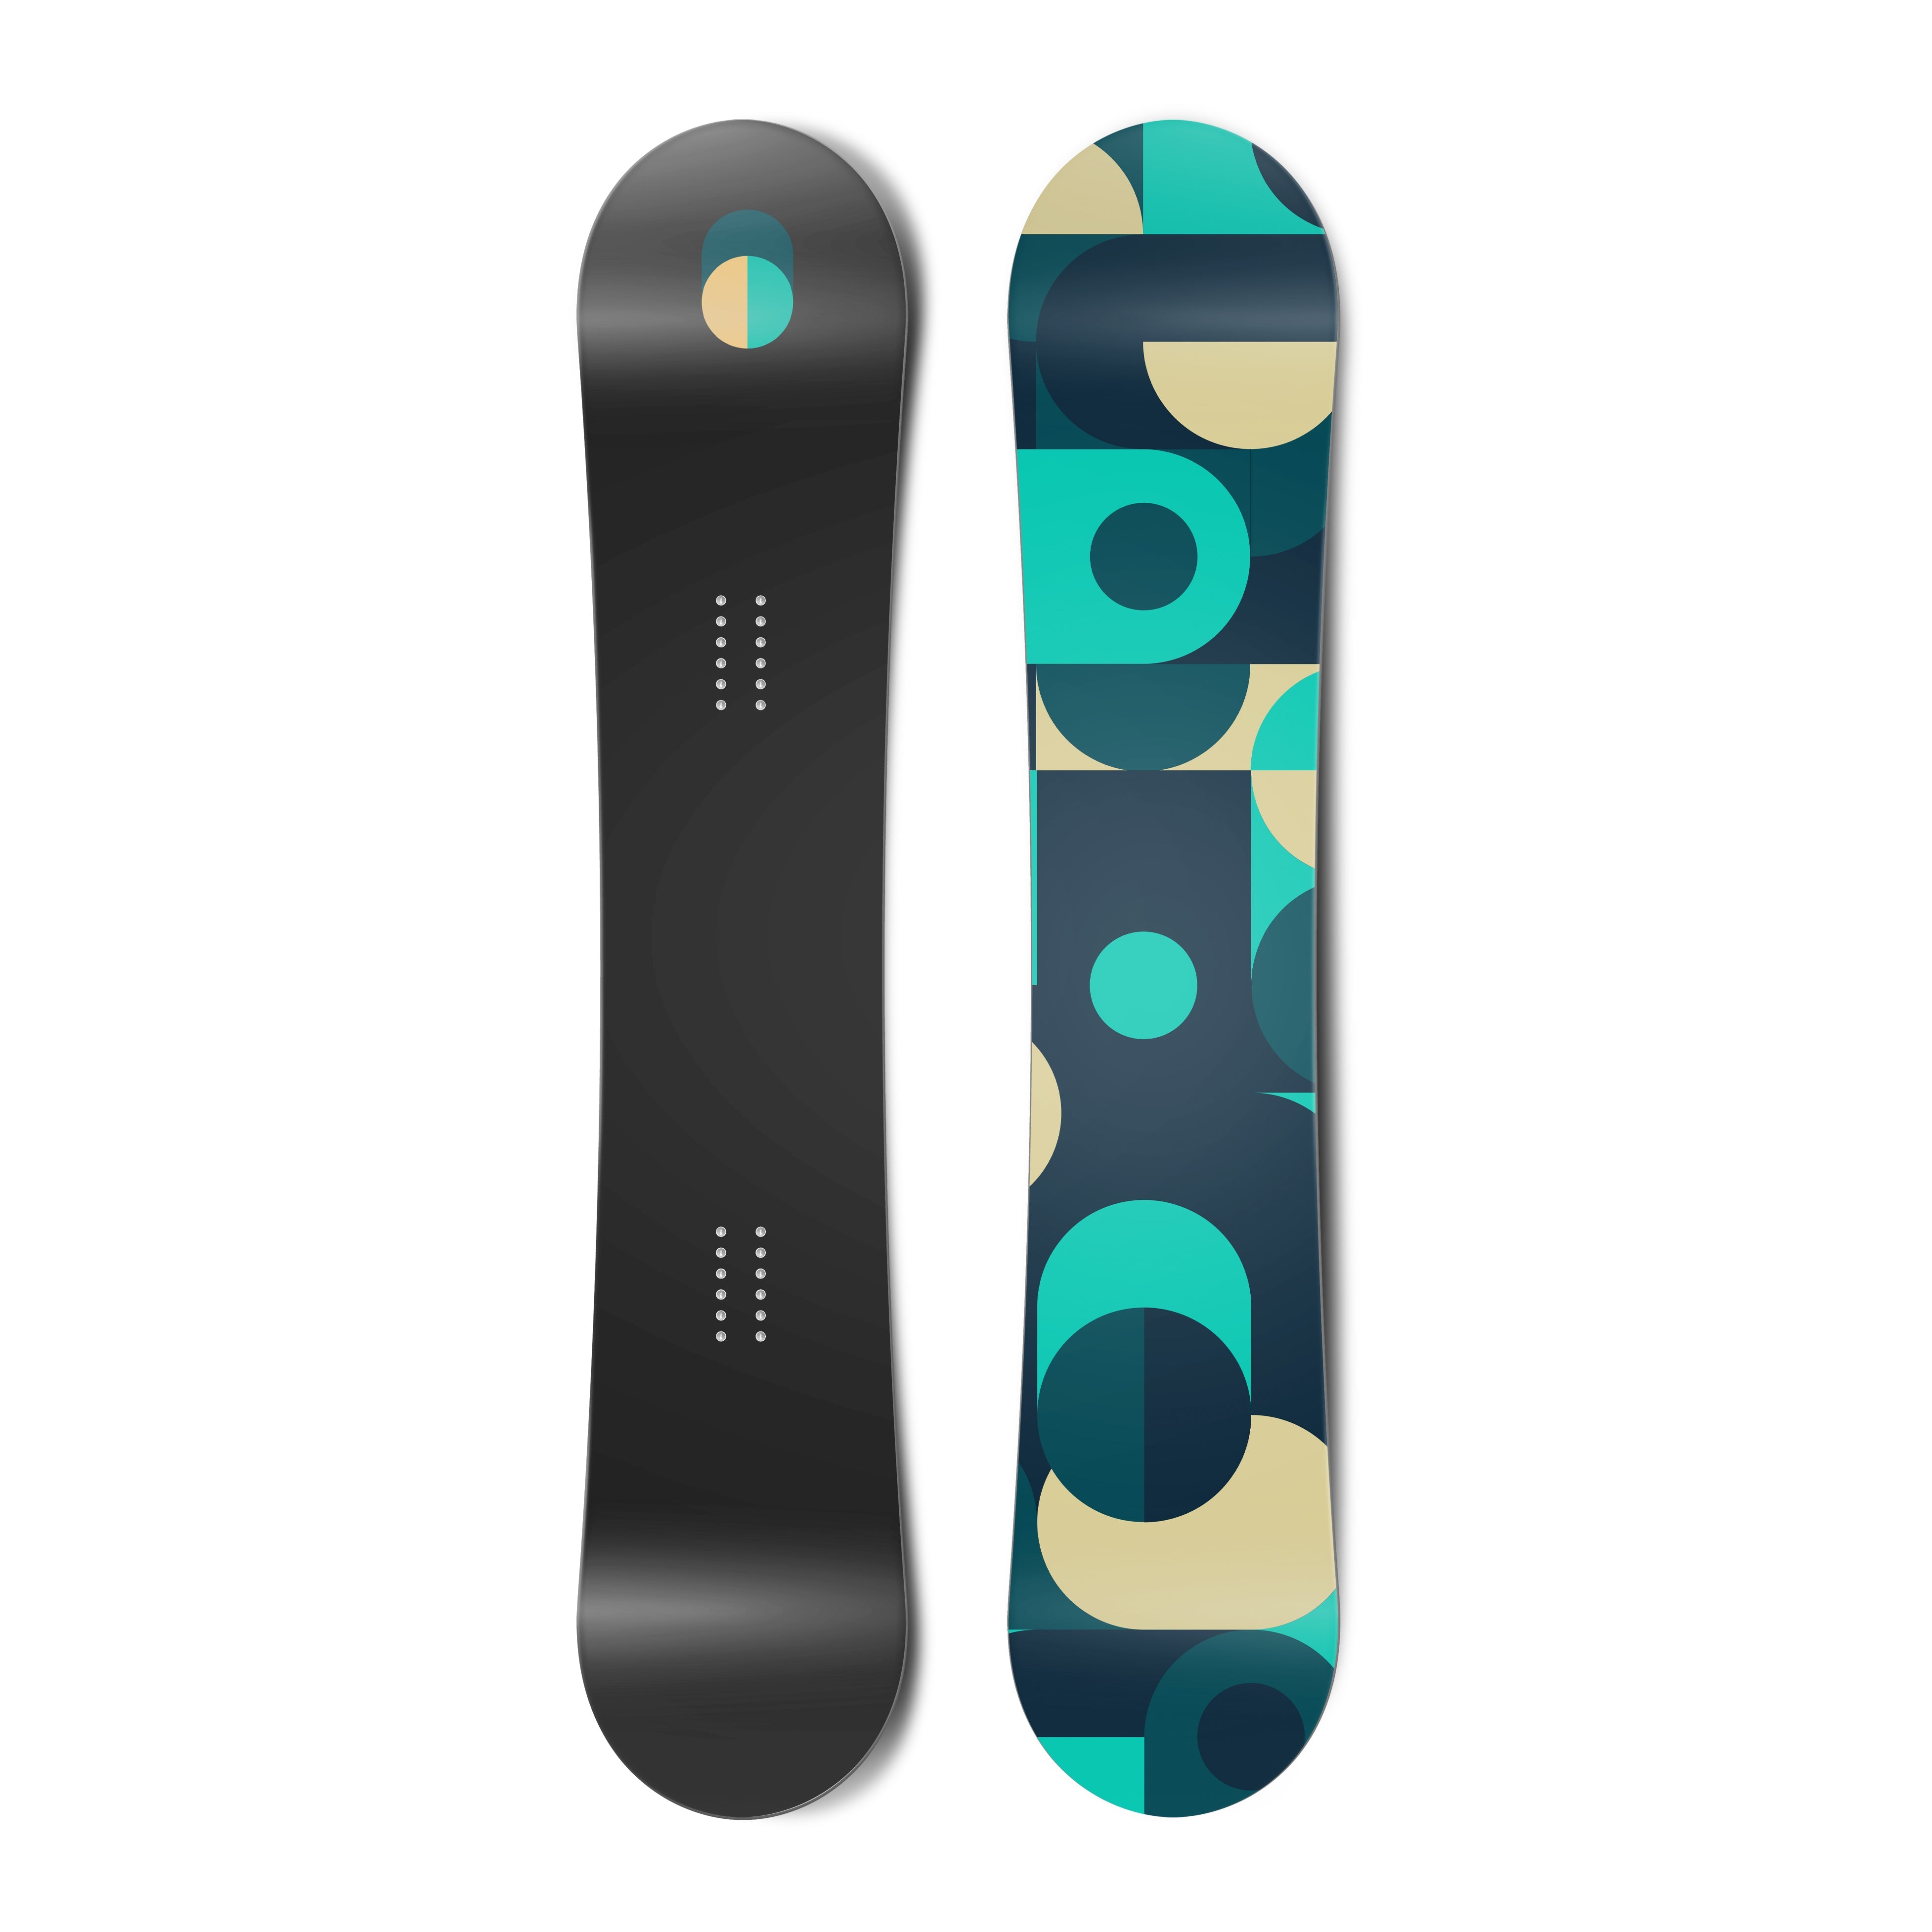 The Out of Stock Snowboard